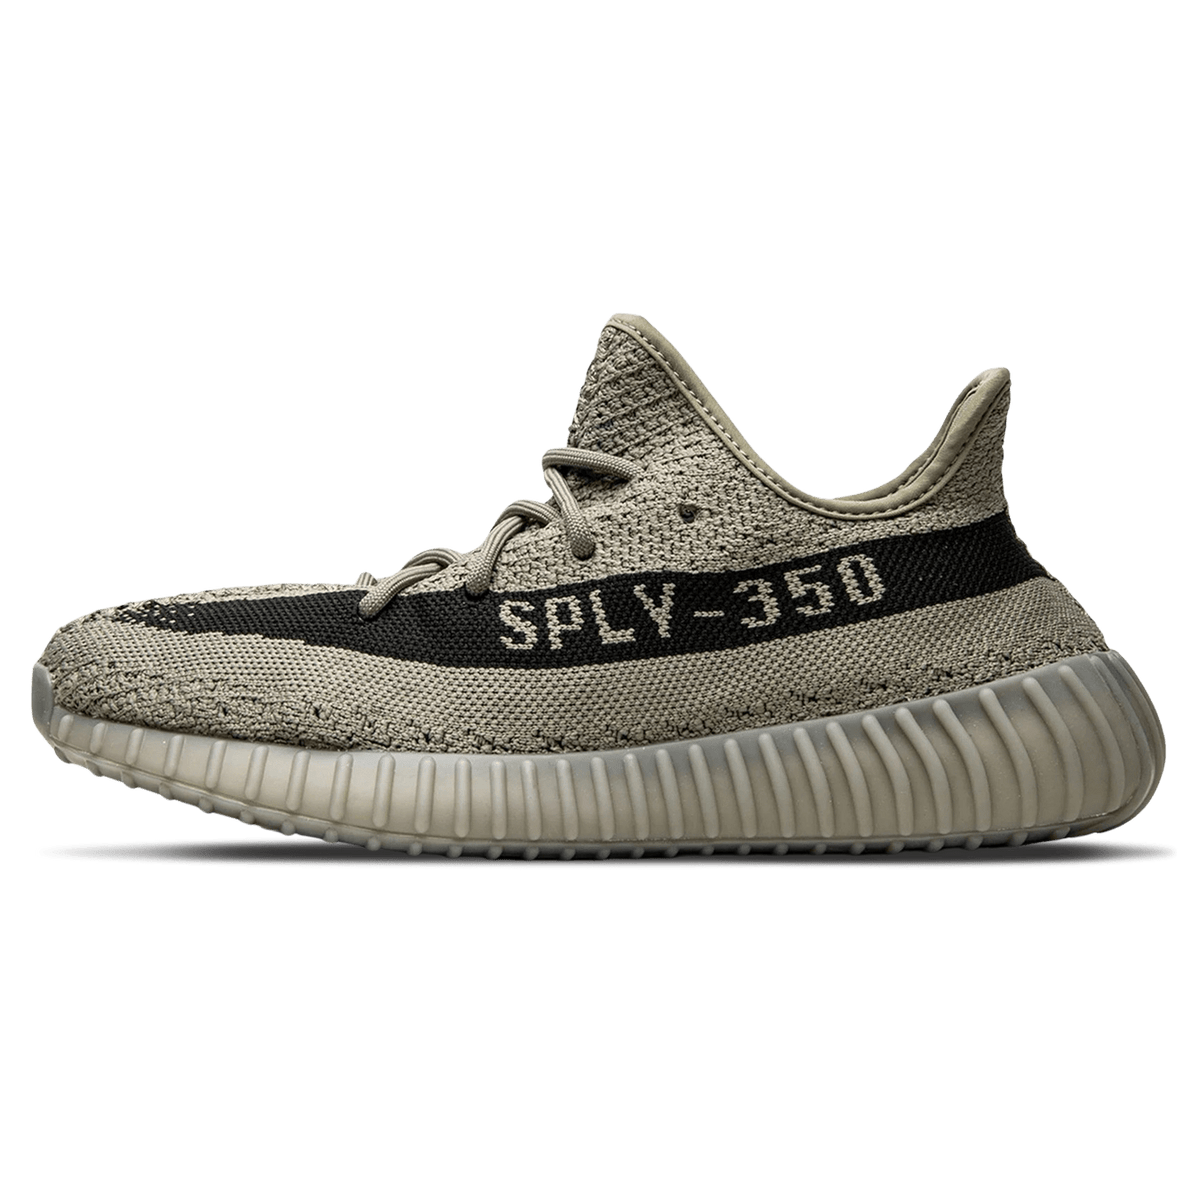 The Off-White Dunks & 'Yecheil' Yeezy Boost 350 V2 Are Now Live on StockX